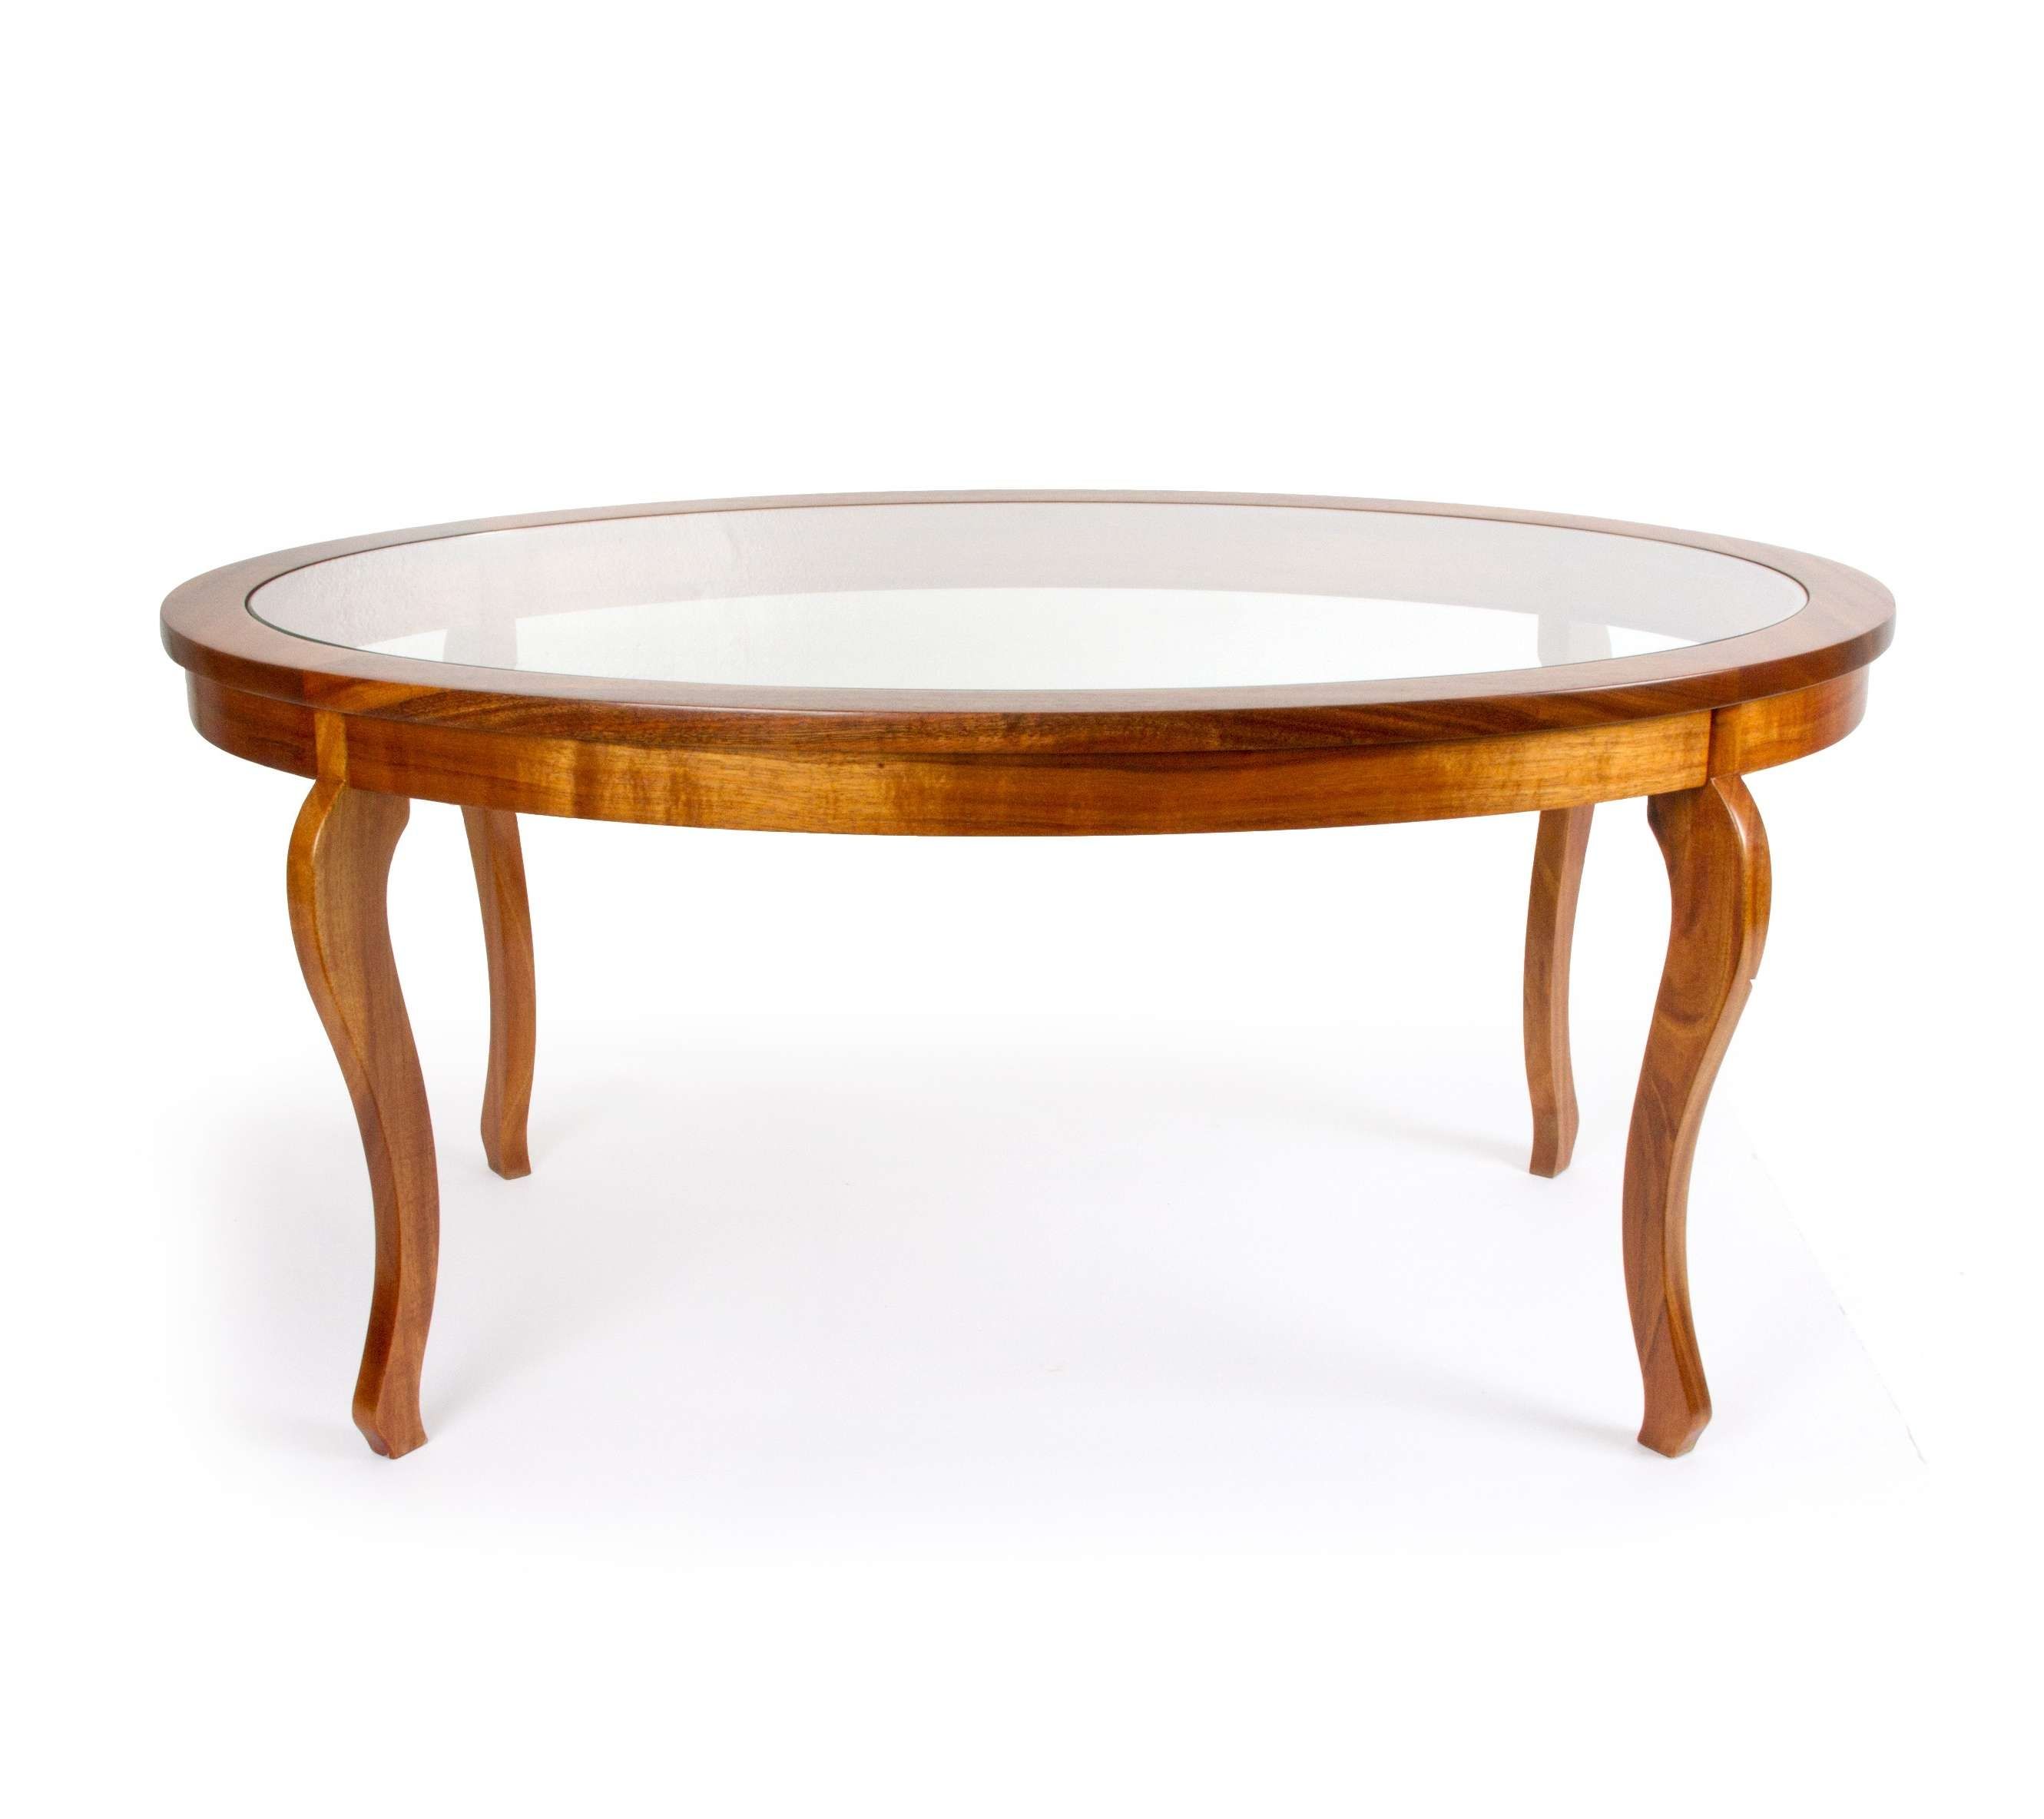 Most Popular High Coffee Tables Inside Oval Coffee Table With Glass Top And High Legs For Small Rustic (View 18 of 20)